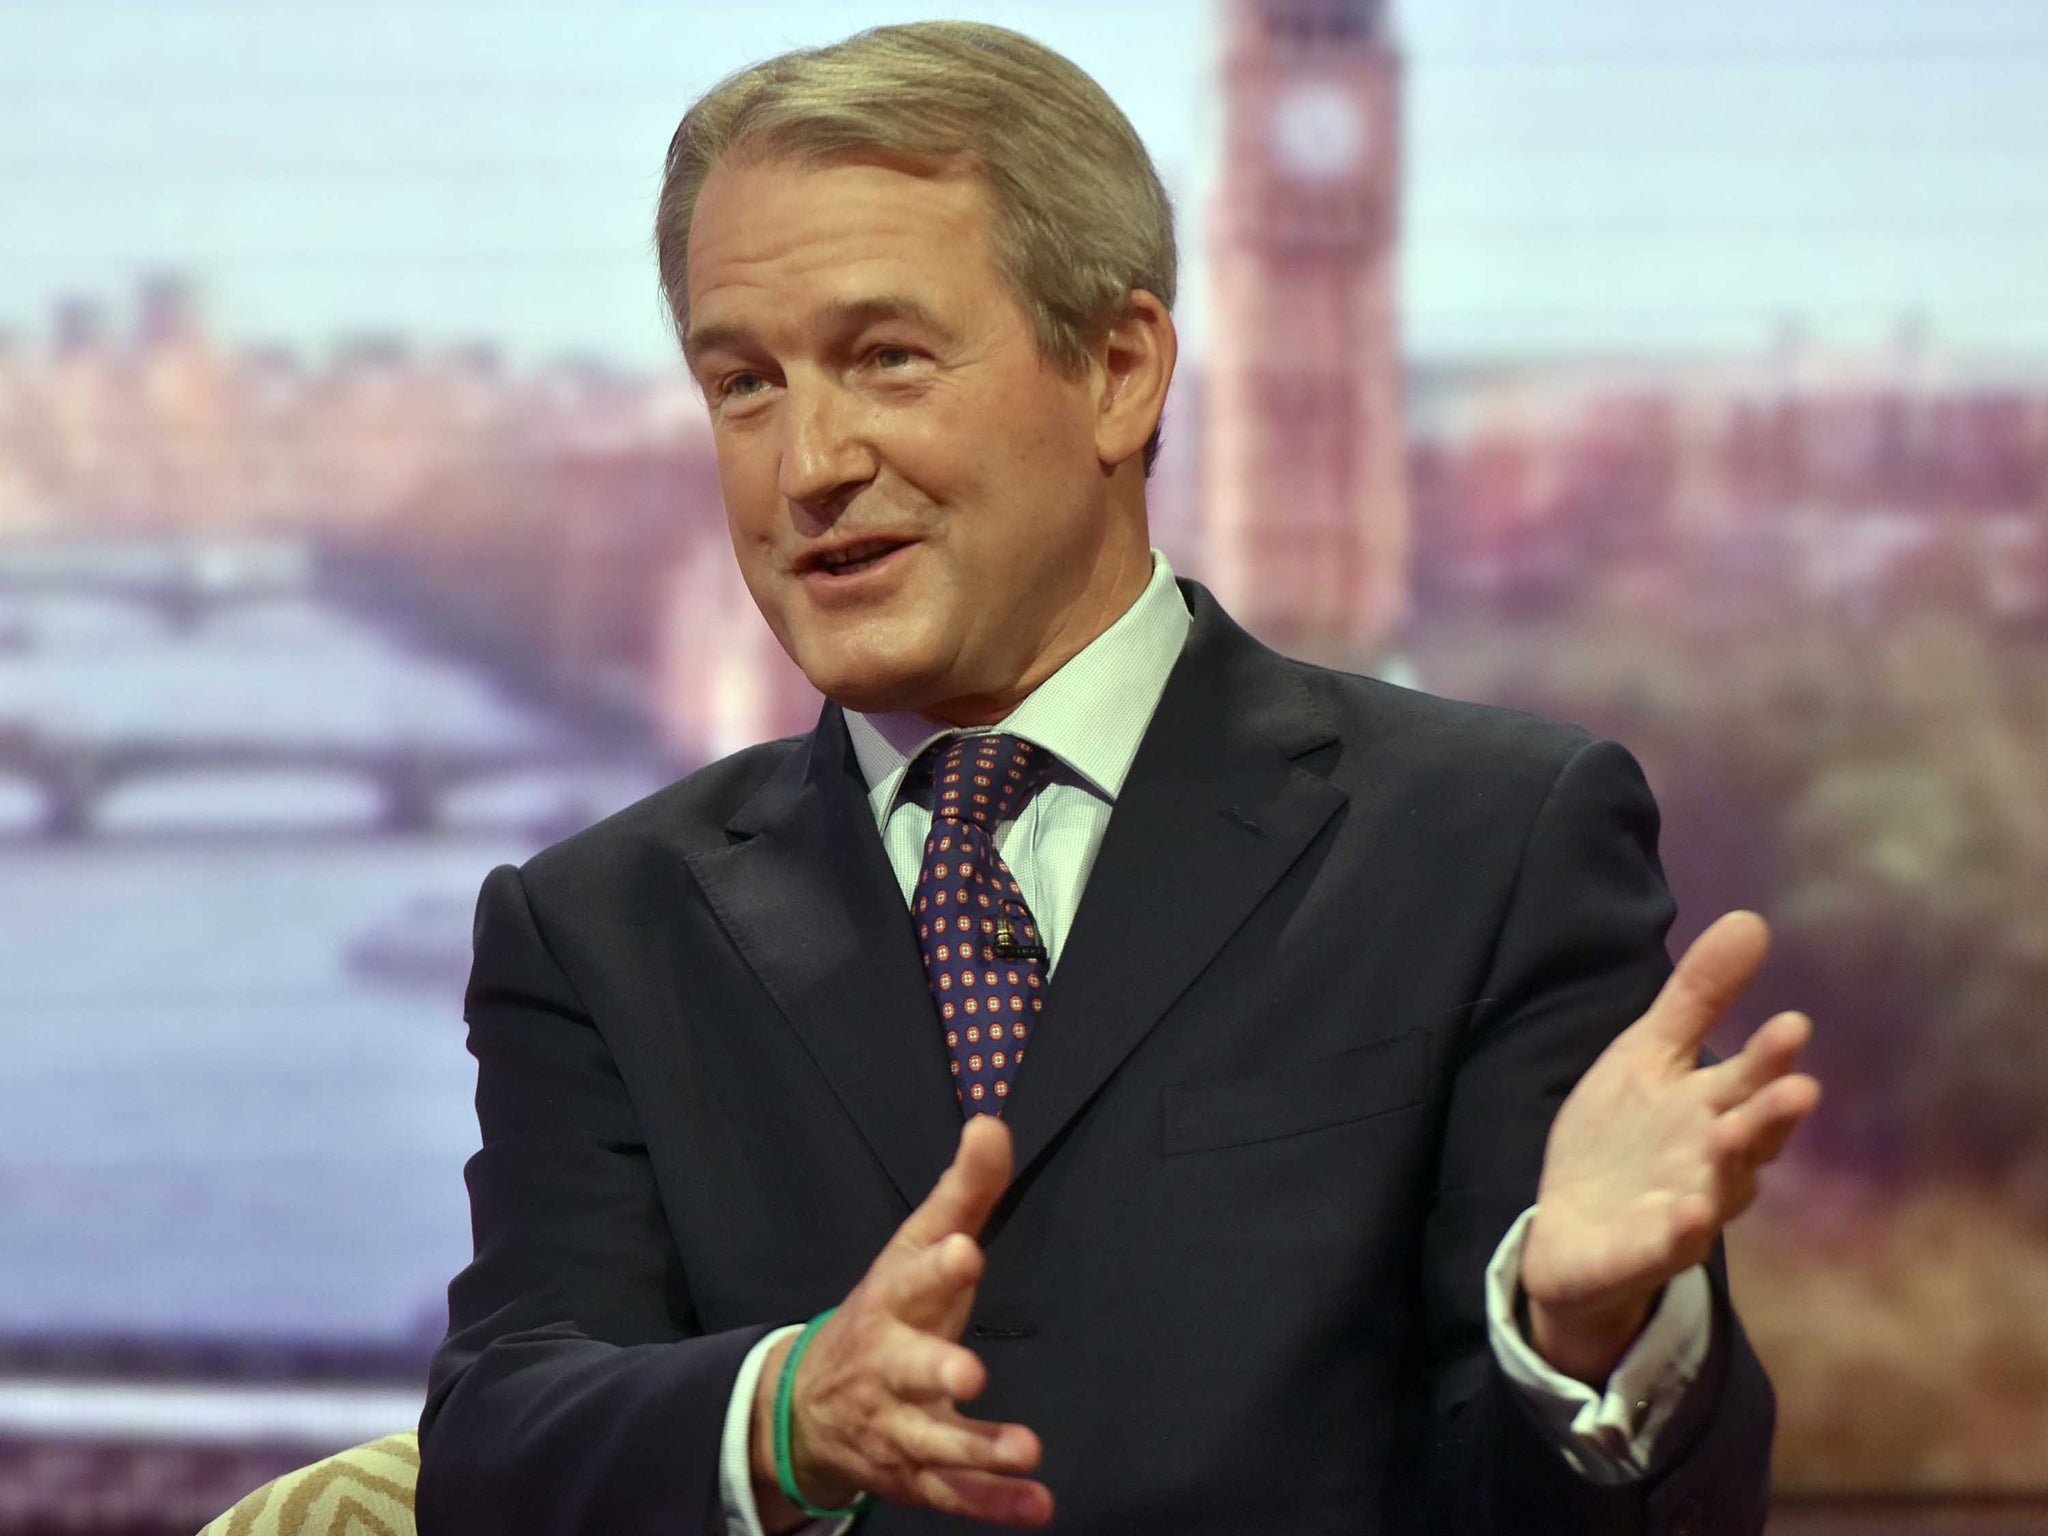 Owen Paterson has urged the Prime Minister to back down before the vote in the Commons, which could result in one of the biggest Tory revolts since John Major’s government was torn apart by a row over Europe 20 years ago